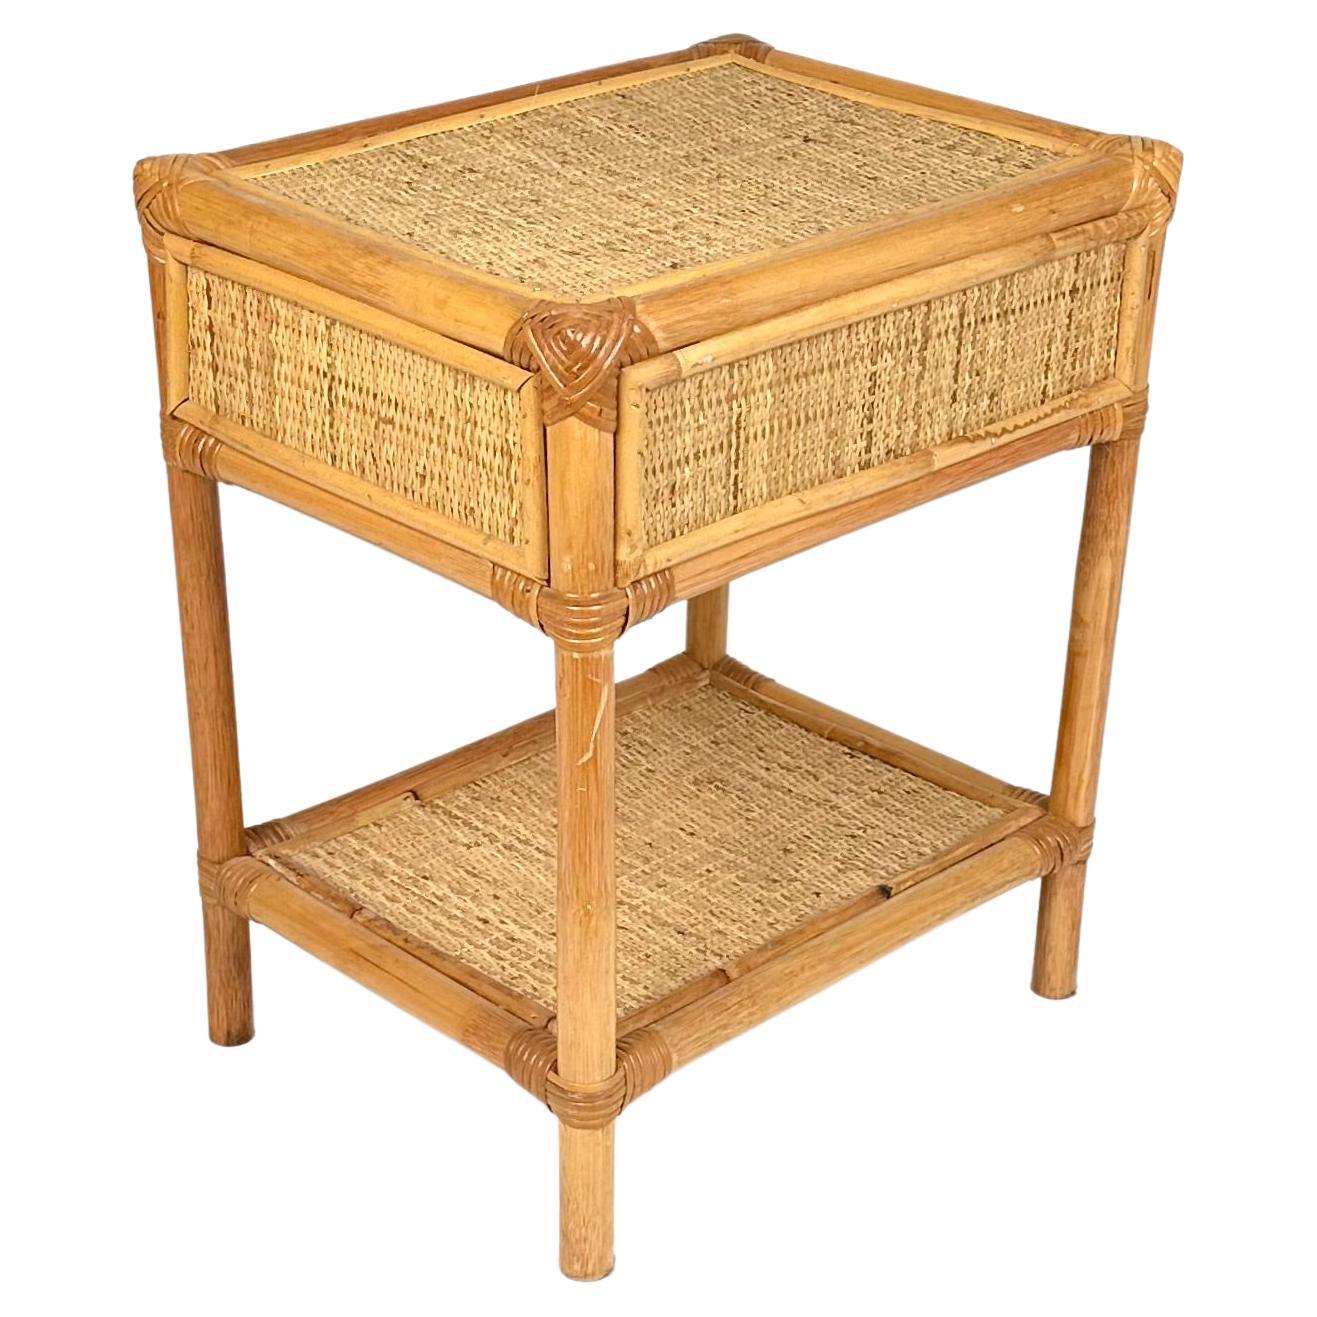 Midcentury Bedside Table Nightstand in Bamboo & Rattan, Italy, 1970s For Sale 2